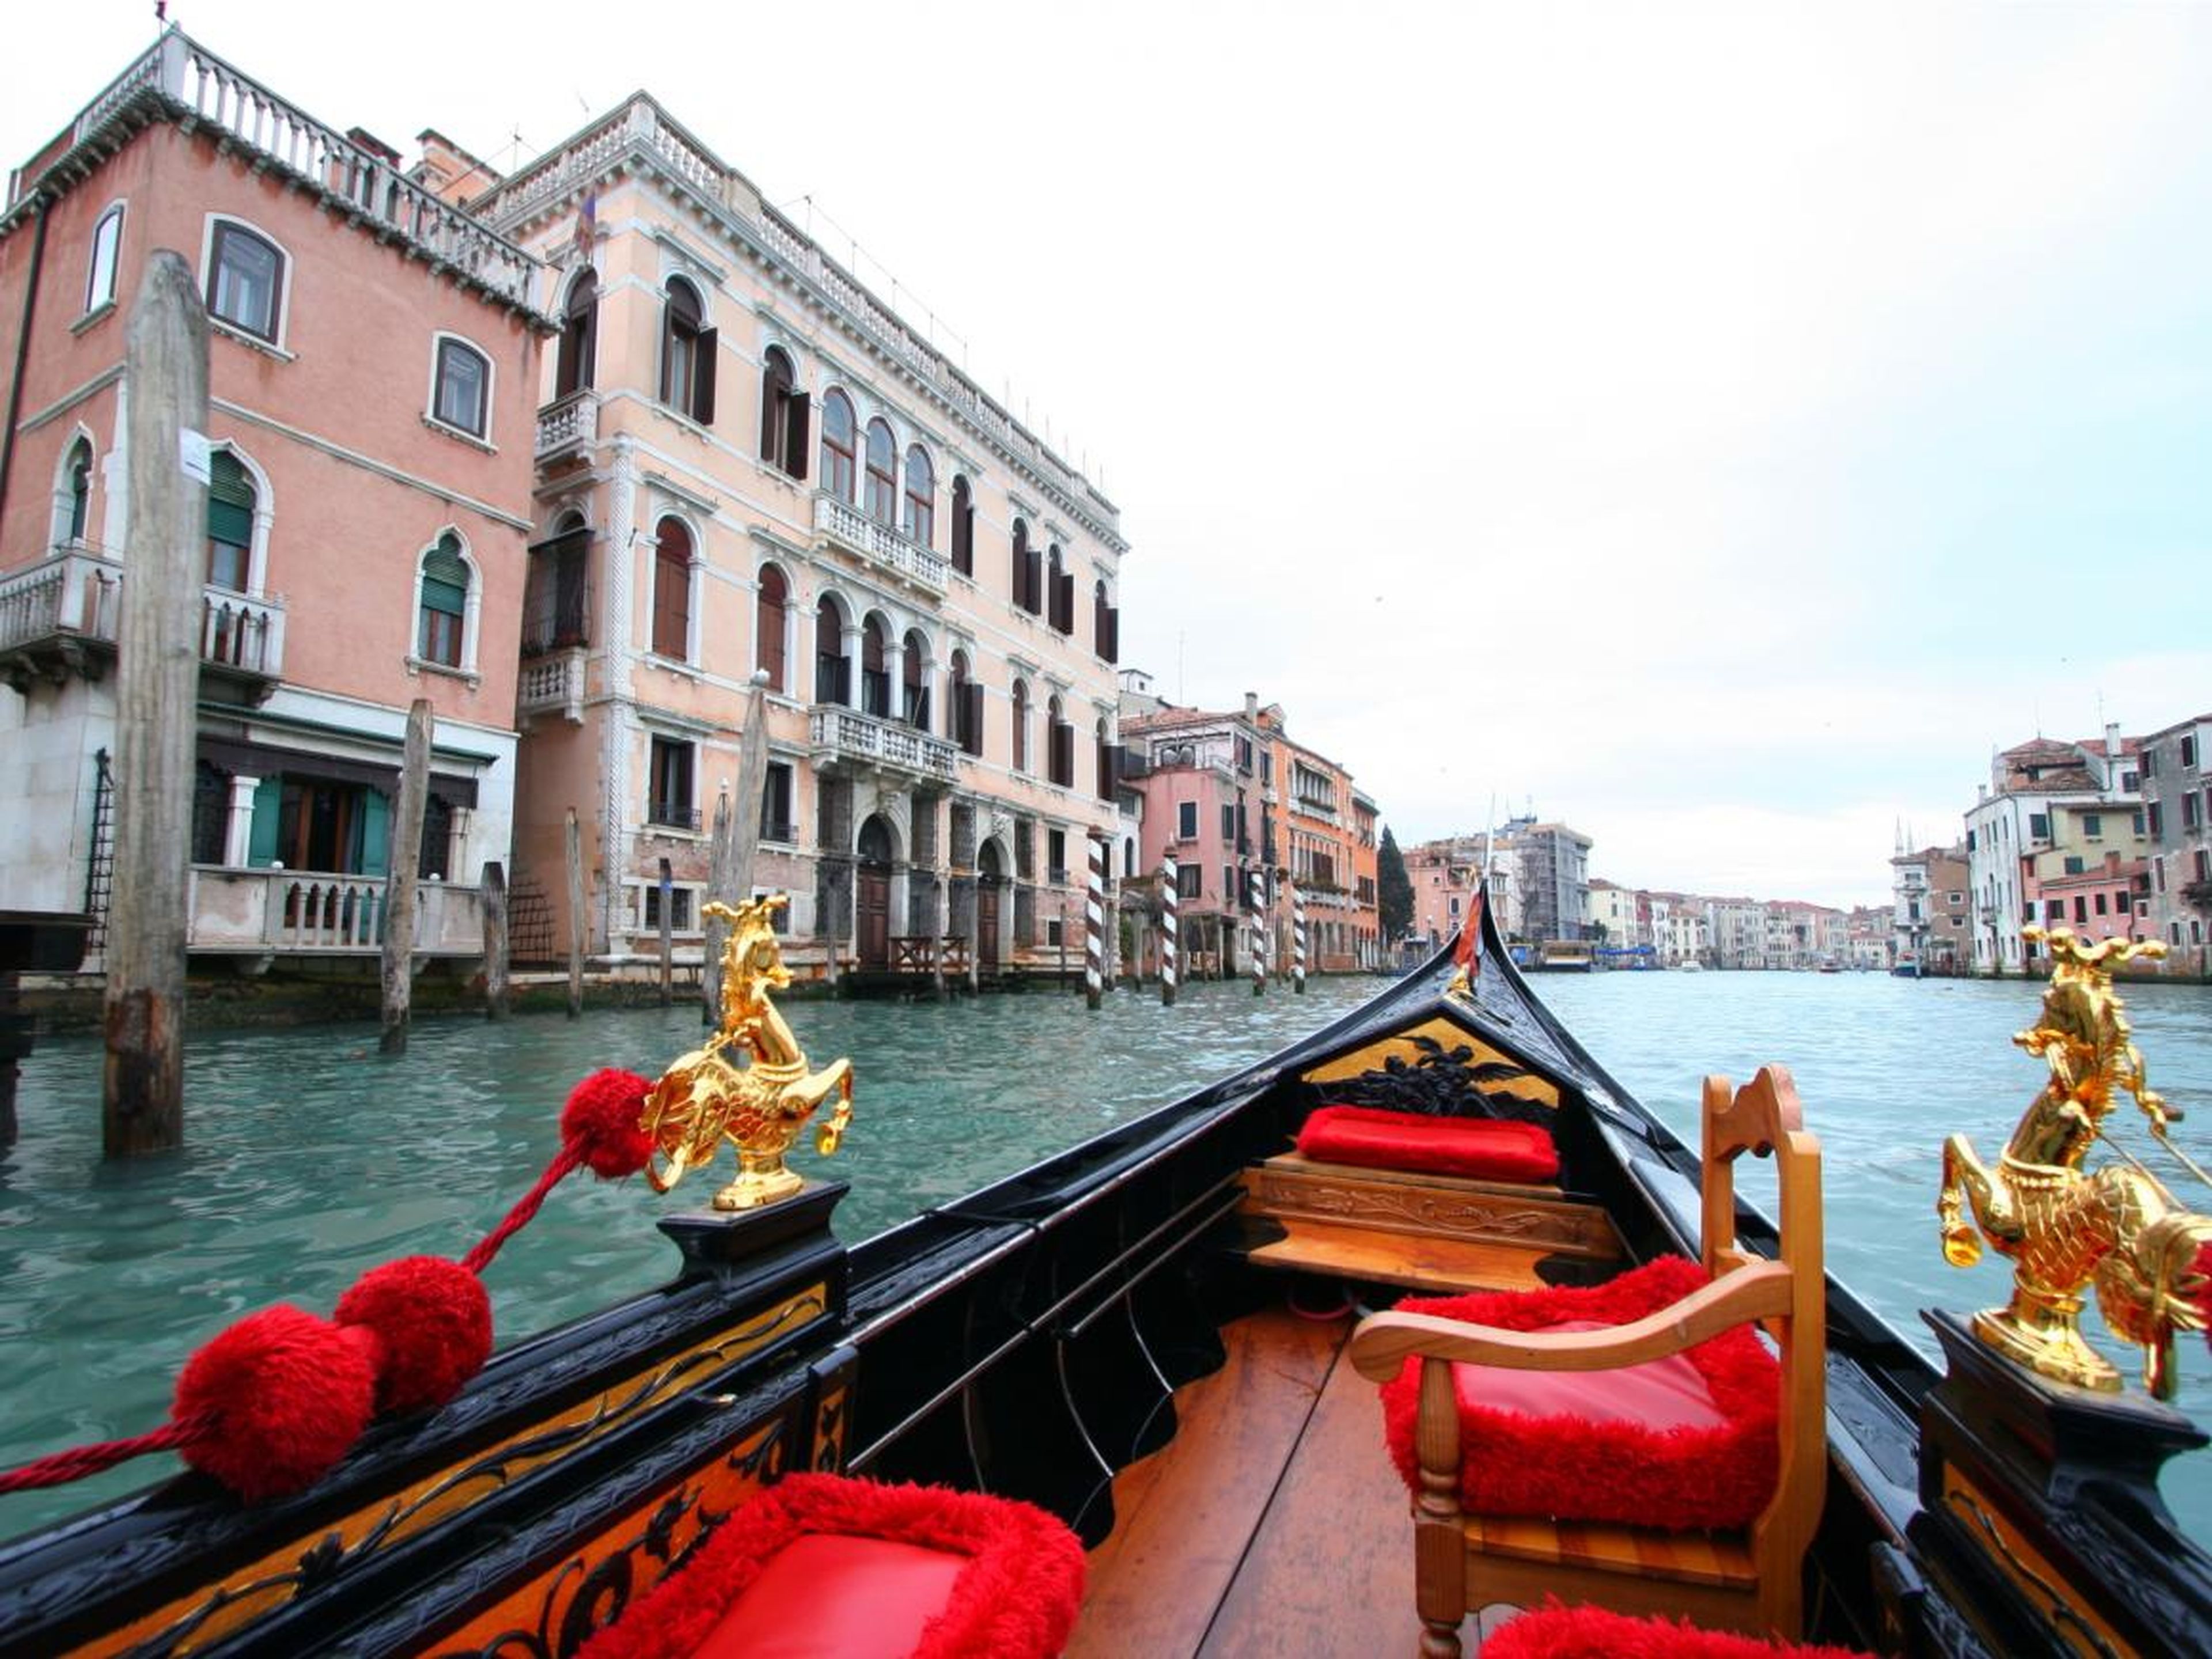 A serene gondola ride on the canals of Venice might seem like an essential experience to have in "The Floating City."